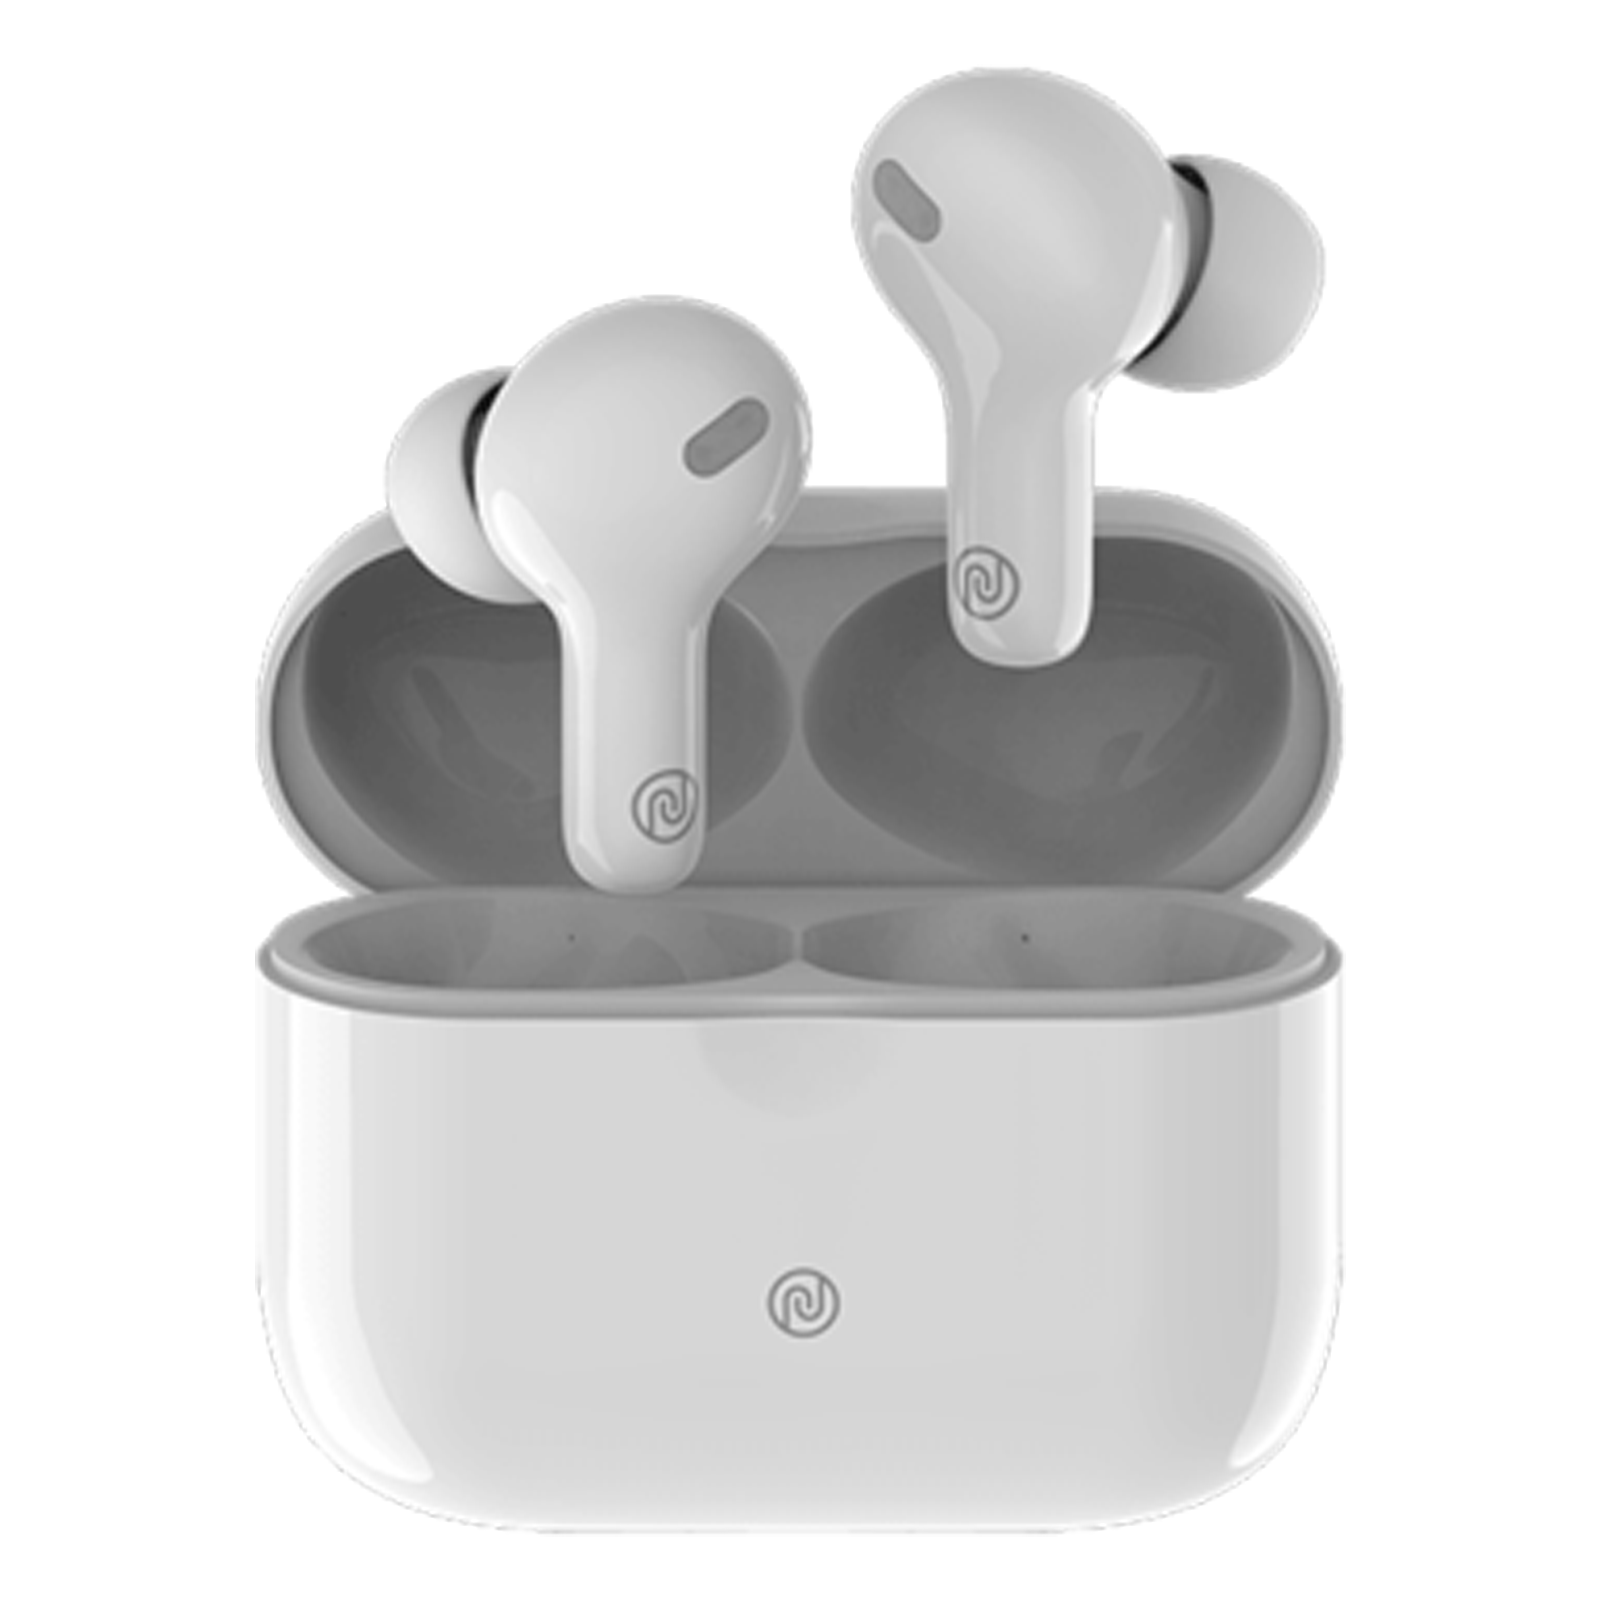 Noise Air Buds+ AUD-HDPHN-AIRBUDS+ In-Ear Truly Wireless Earbuds With Mic (Bluetooth 5.0, Sweat Proof, Pearl White)_1